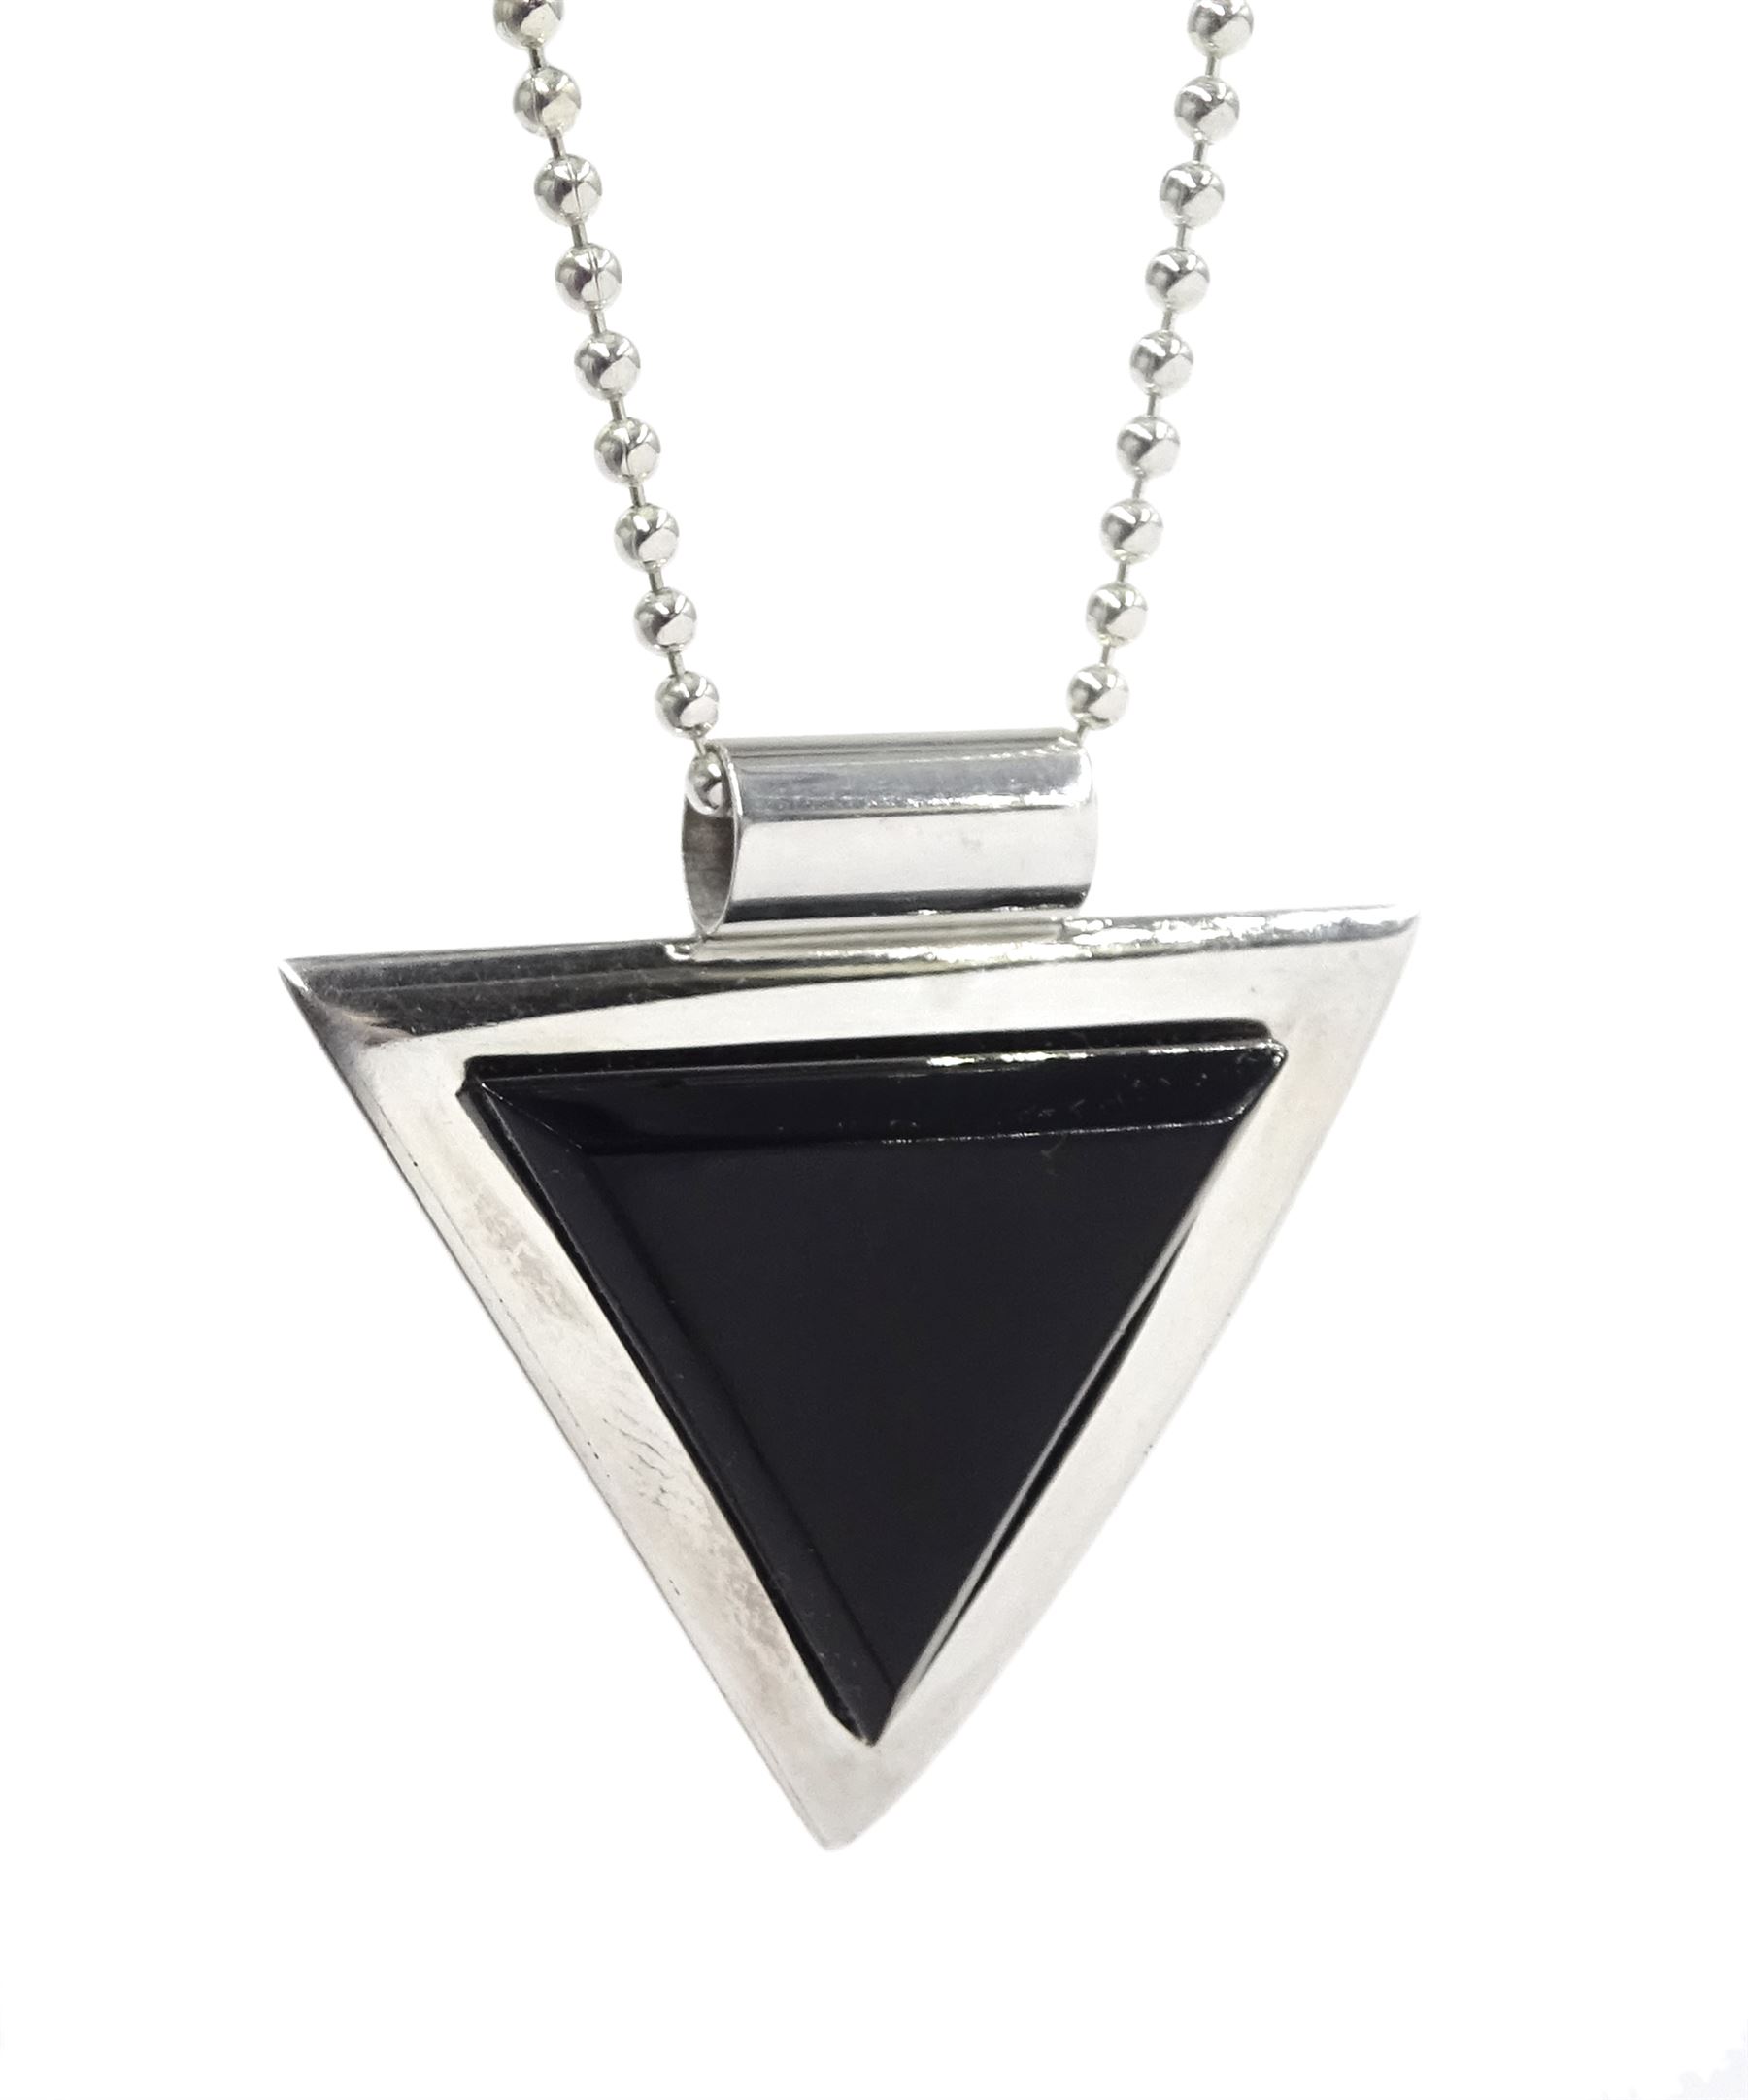 Silver contemporary triangular Whitby jet pendant necklace - Image 2 of 4